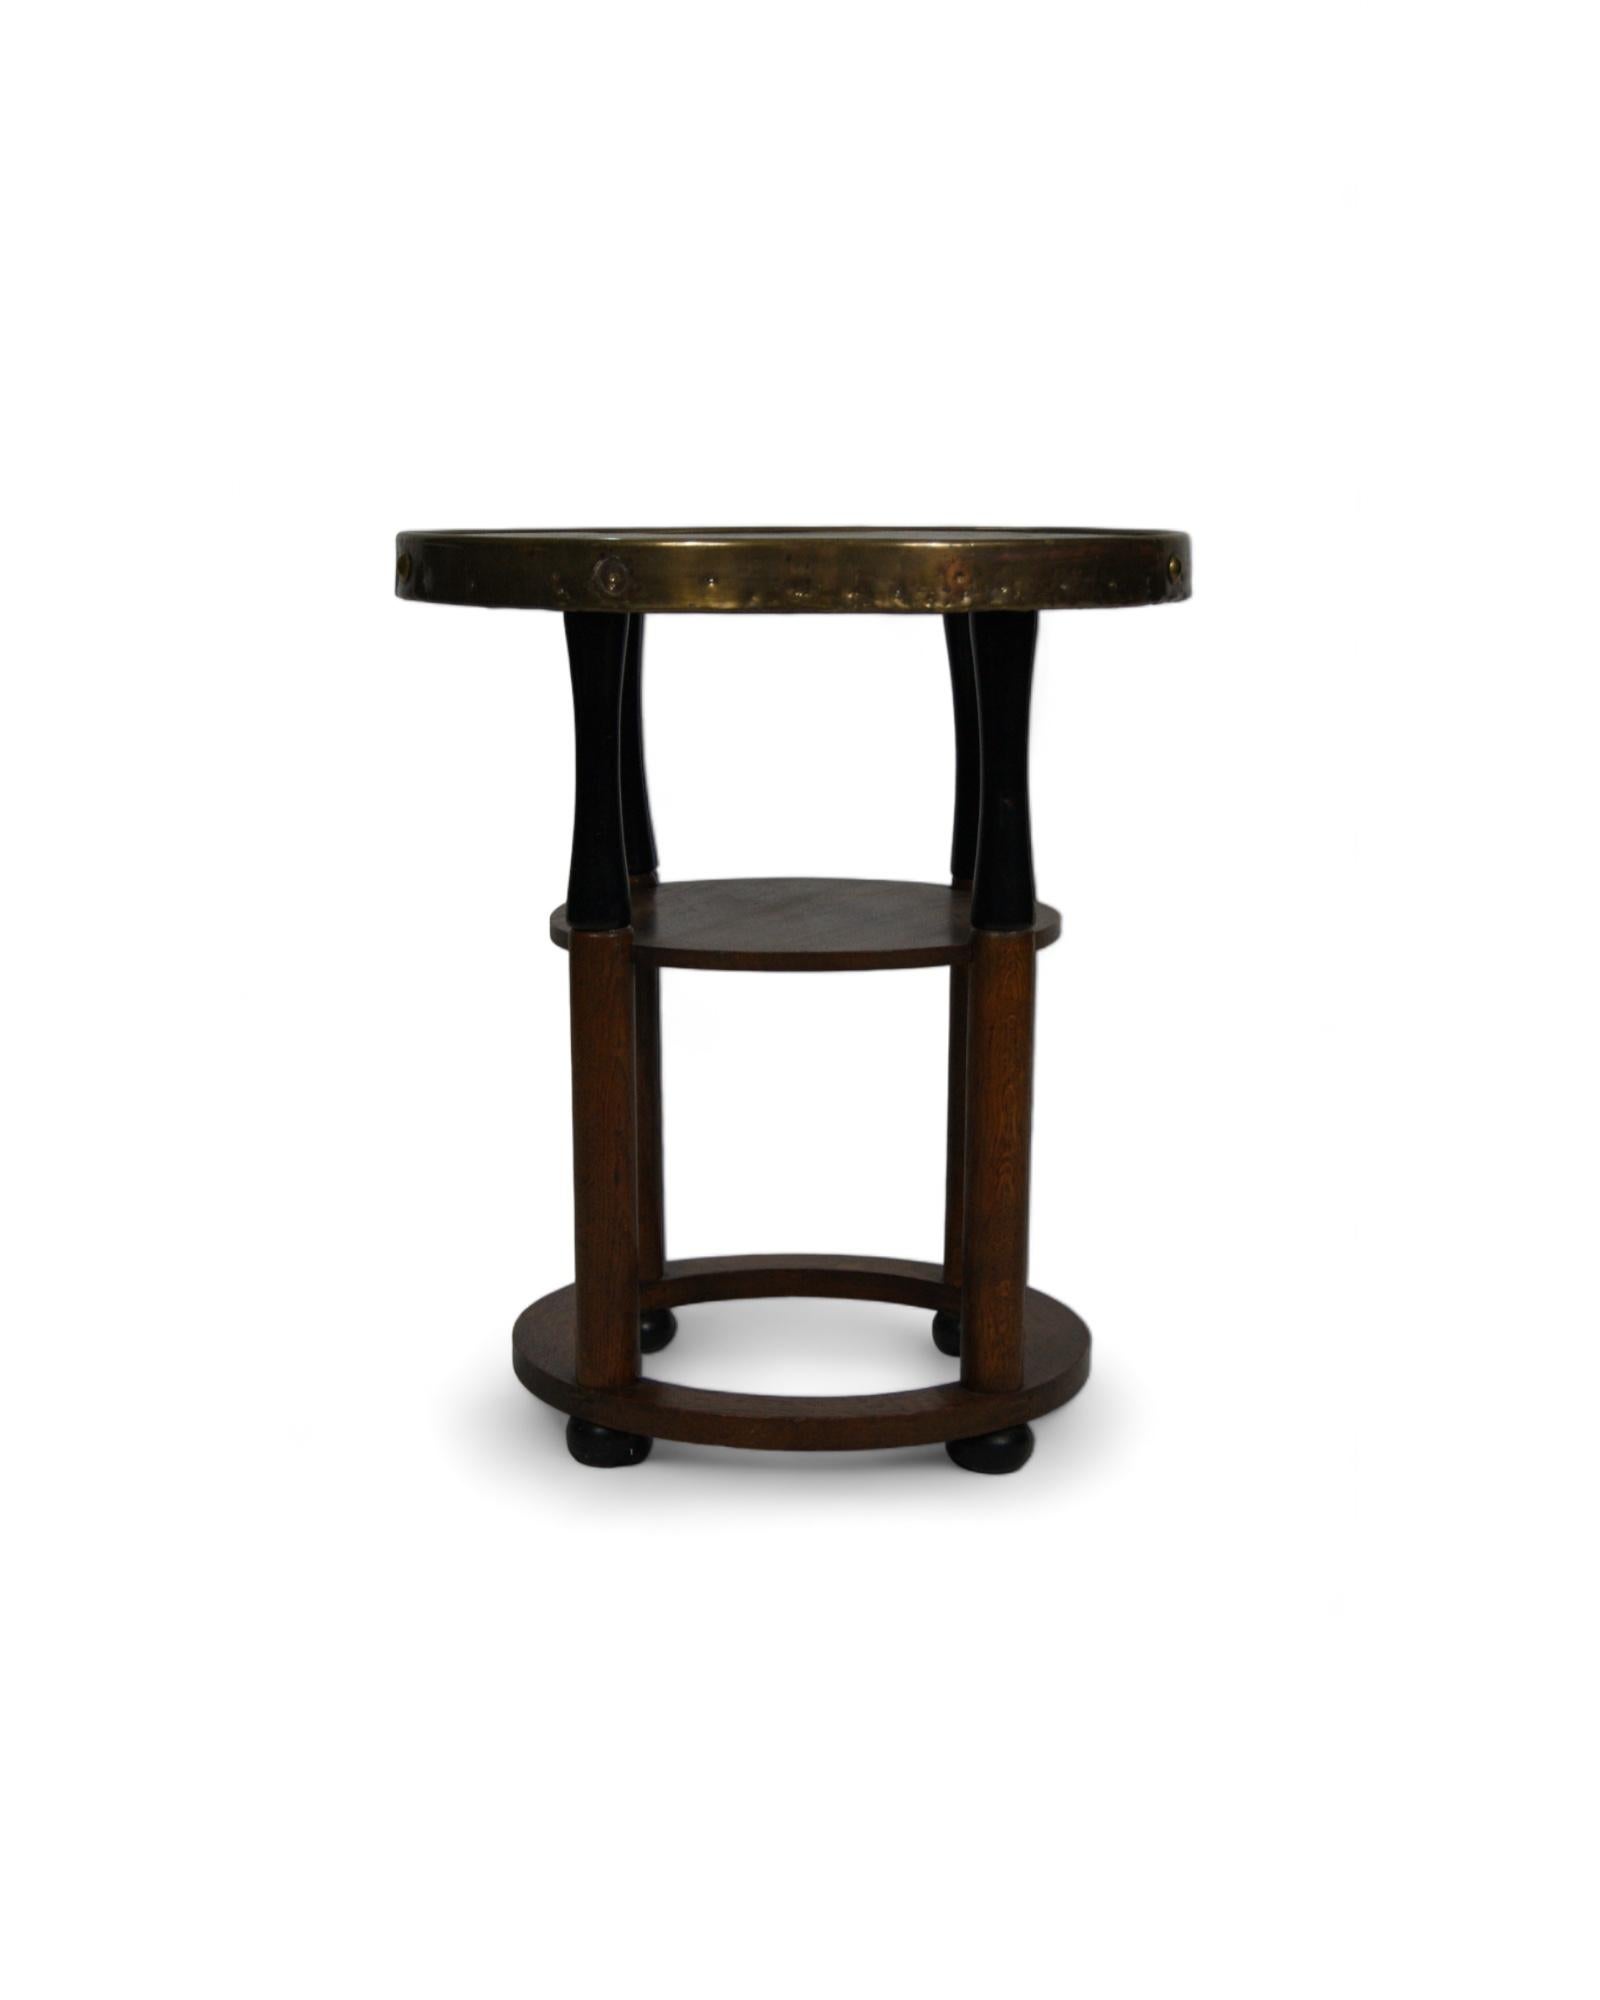 A timeless gem: a vintage Art Nouveau side table, evoking the elegance and charm of the early 20th century. With its meticulously carved hardwood structure, this table breathes the sophistication of a bygone era, where craftsmanship was elevated to